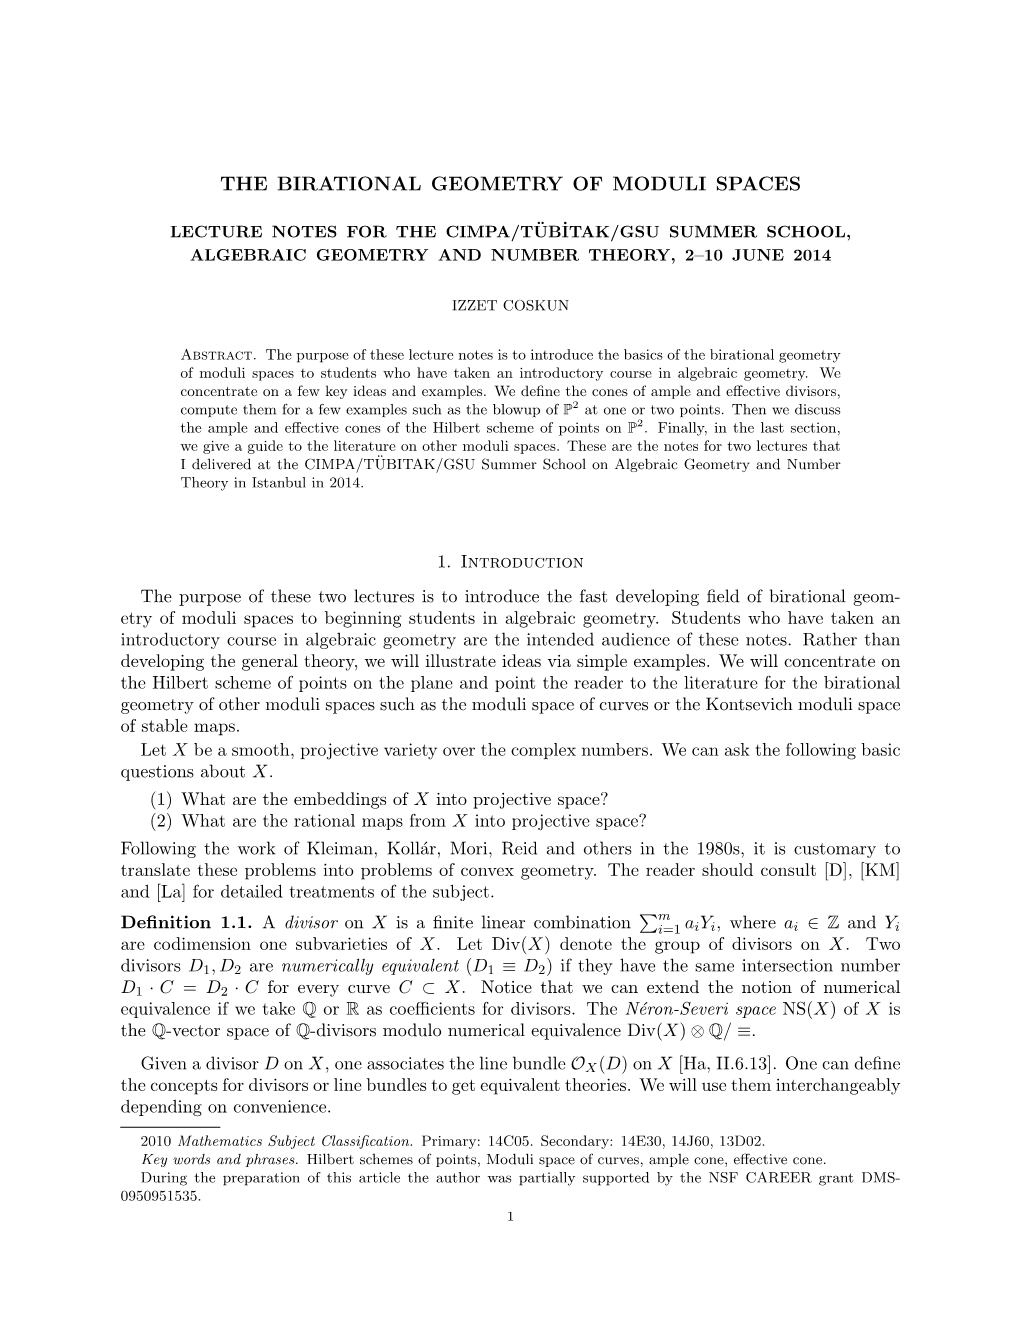 The Birational Geometry of Moduli Spaces